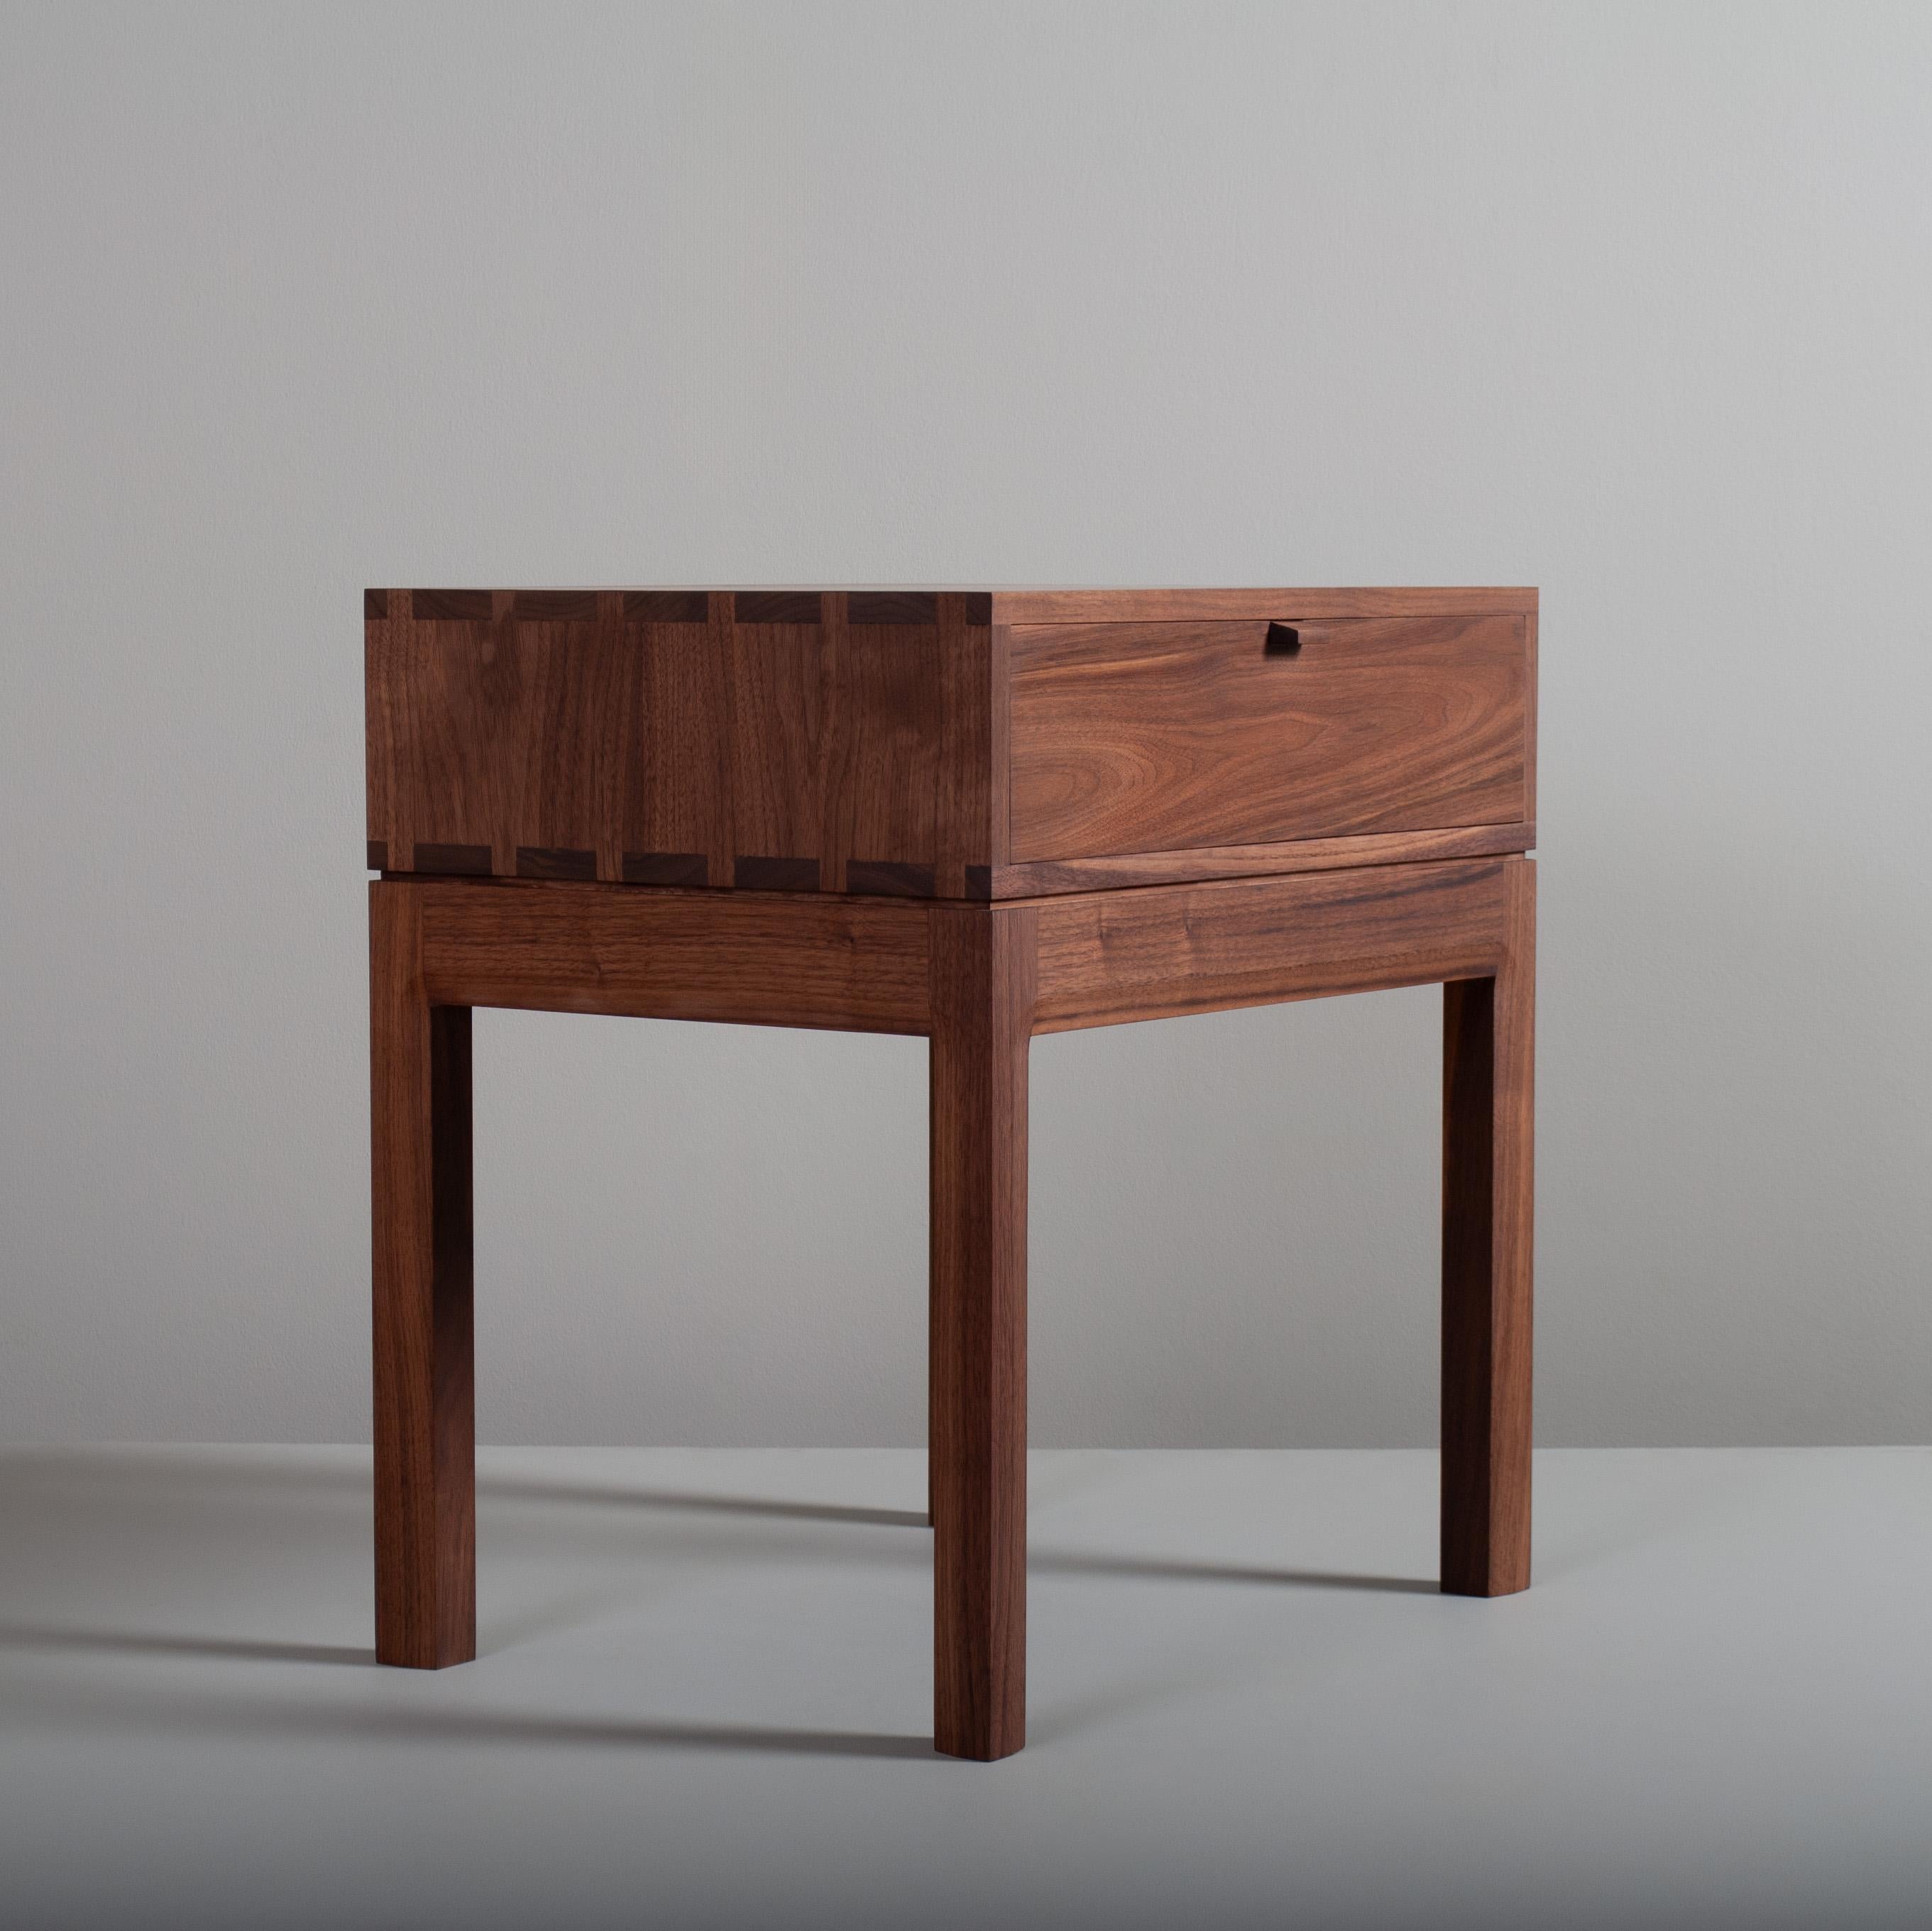 American black walnut hand-crafted nightstands or end tables in a midcentury modernist design. These are constructed from the finest American black walnut with the inner dovetailed jointed traditional drawer carcass in prime English Oak. The main